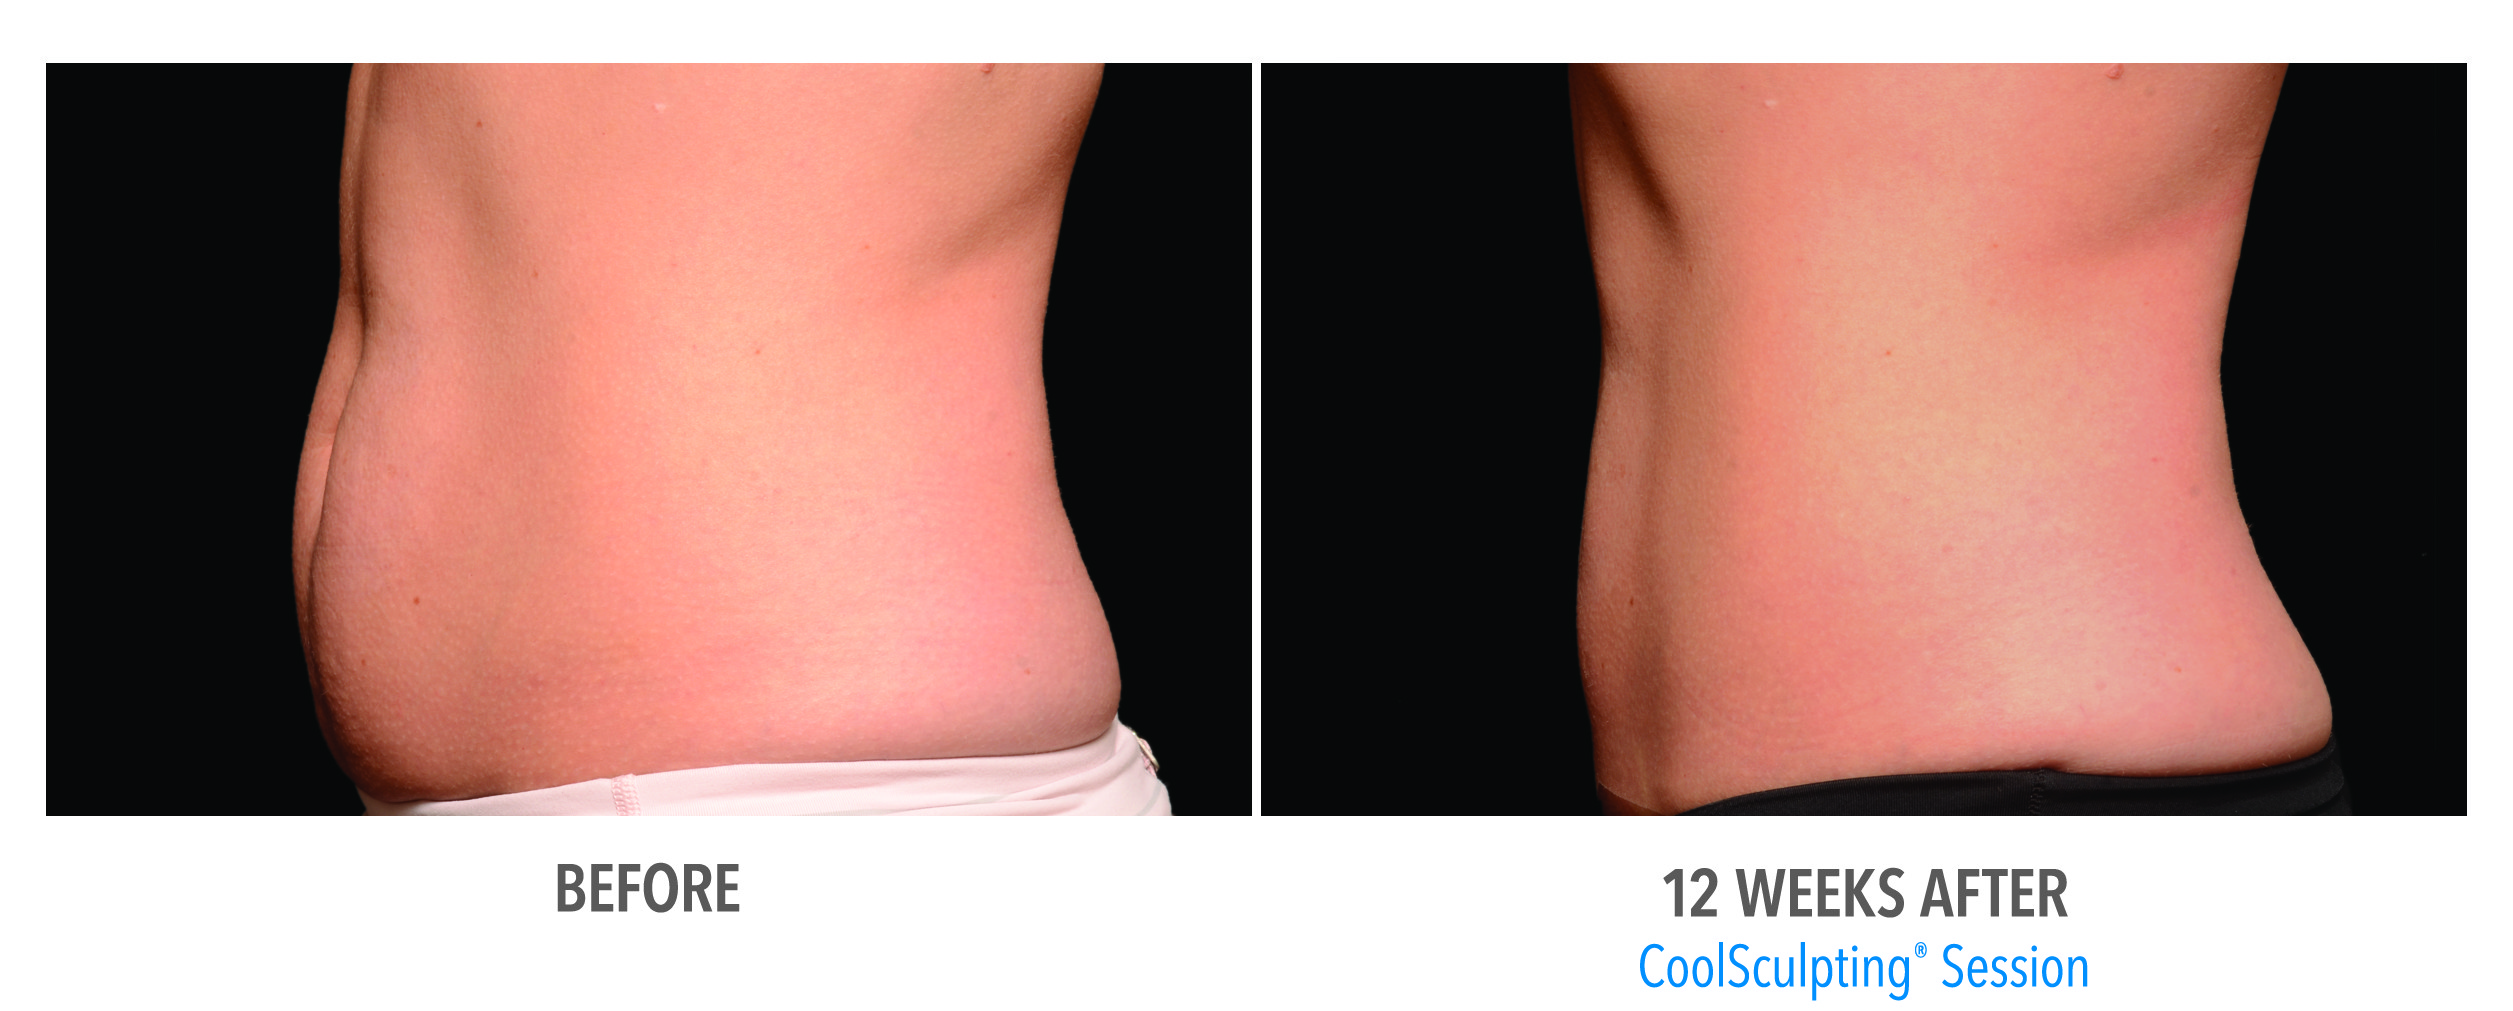 Hinsdale CoolSculpting